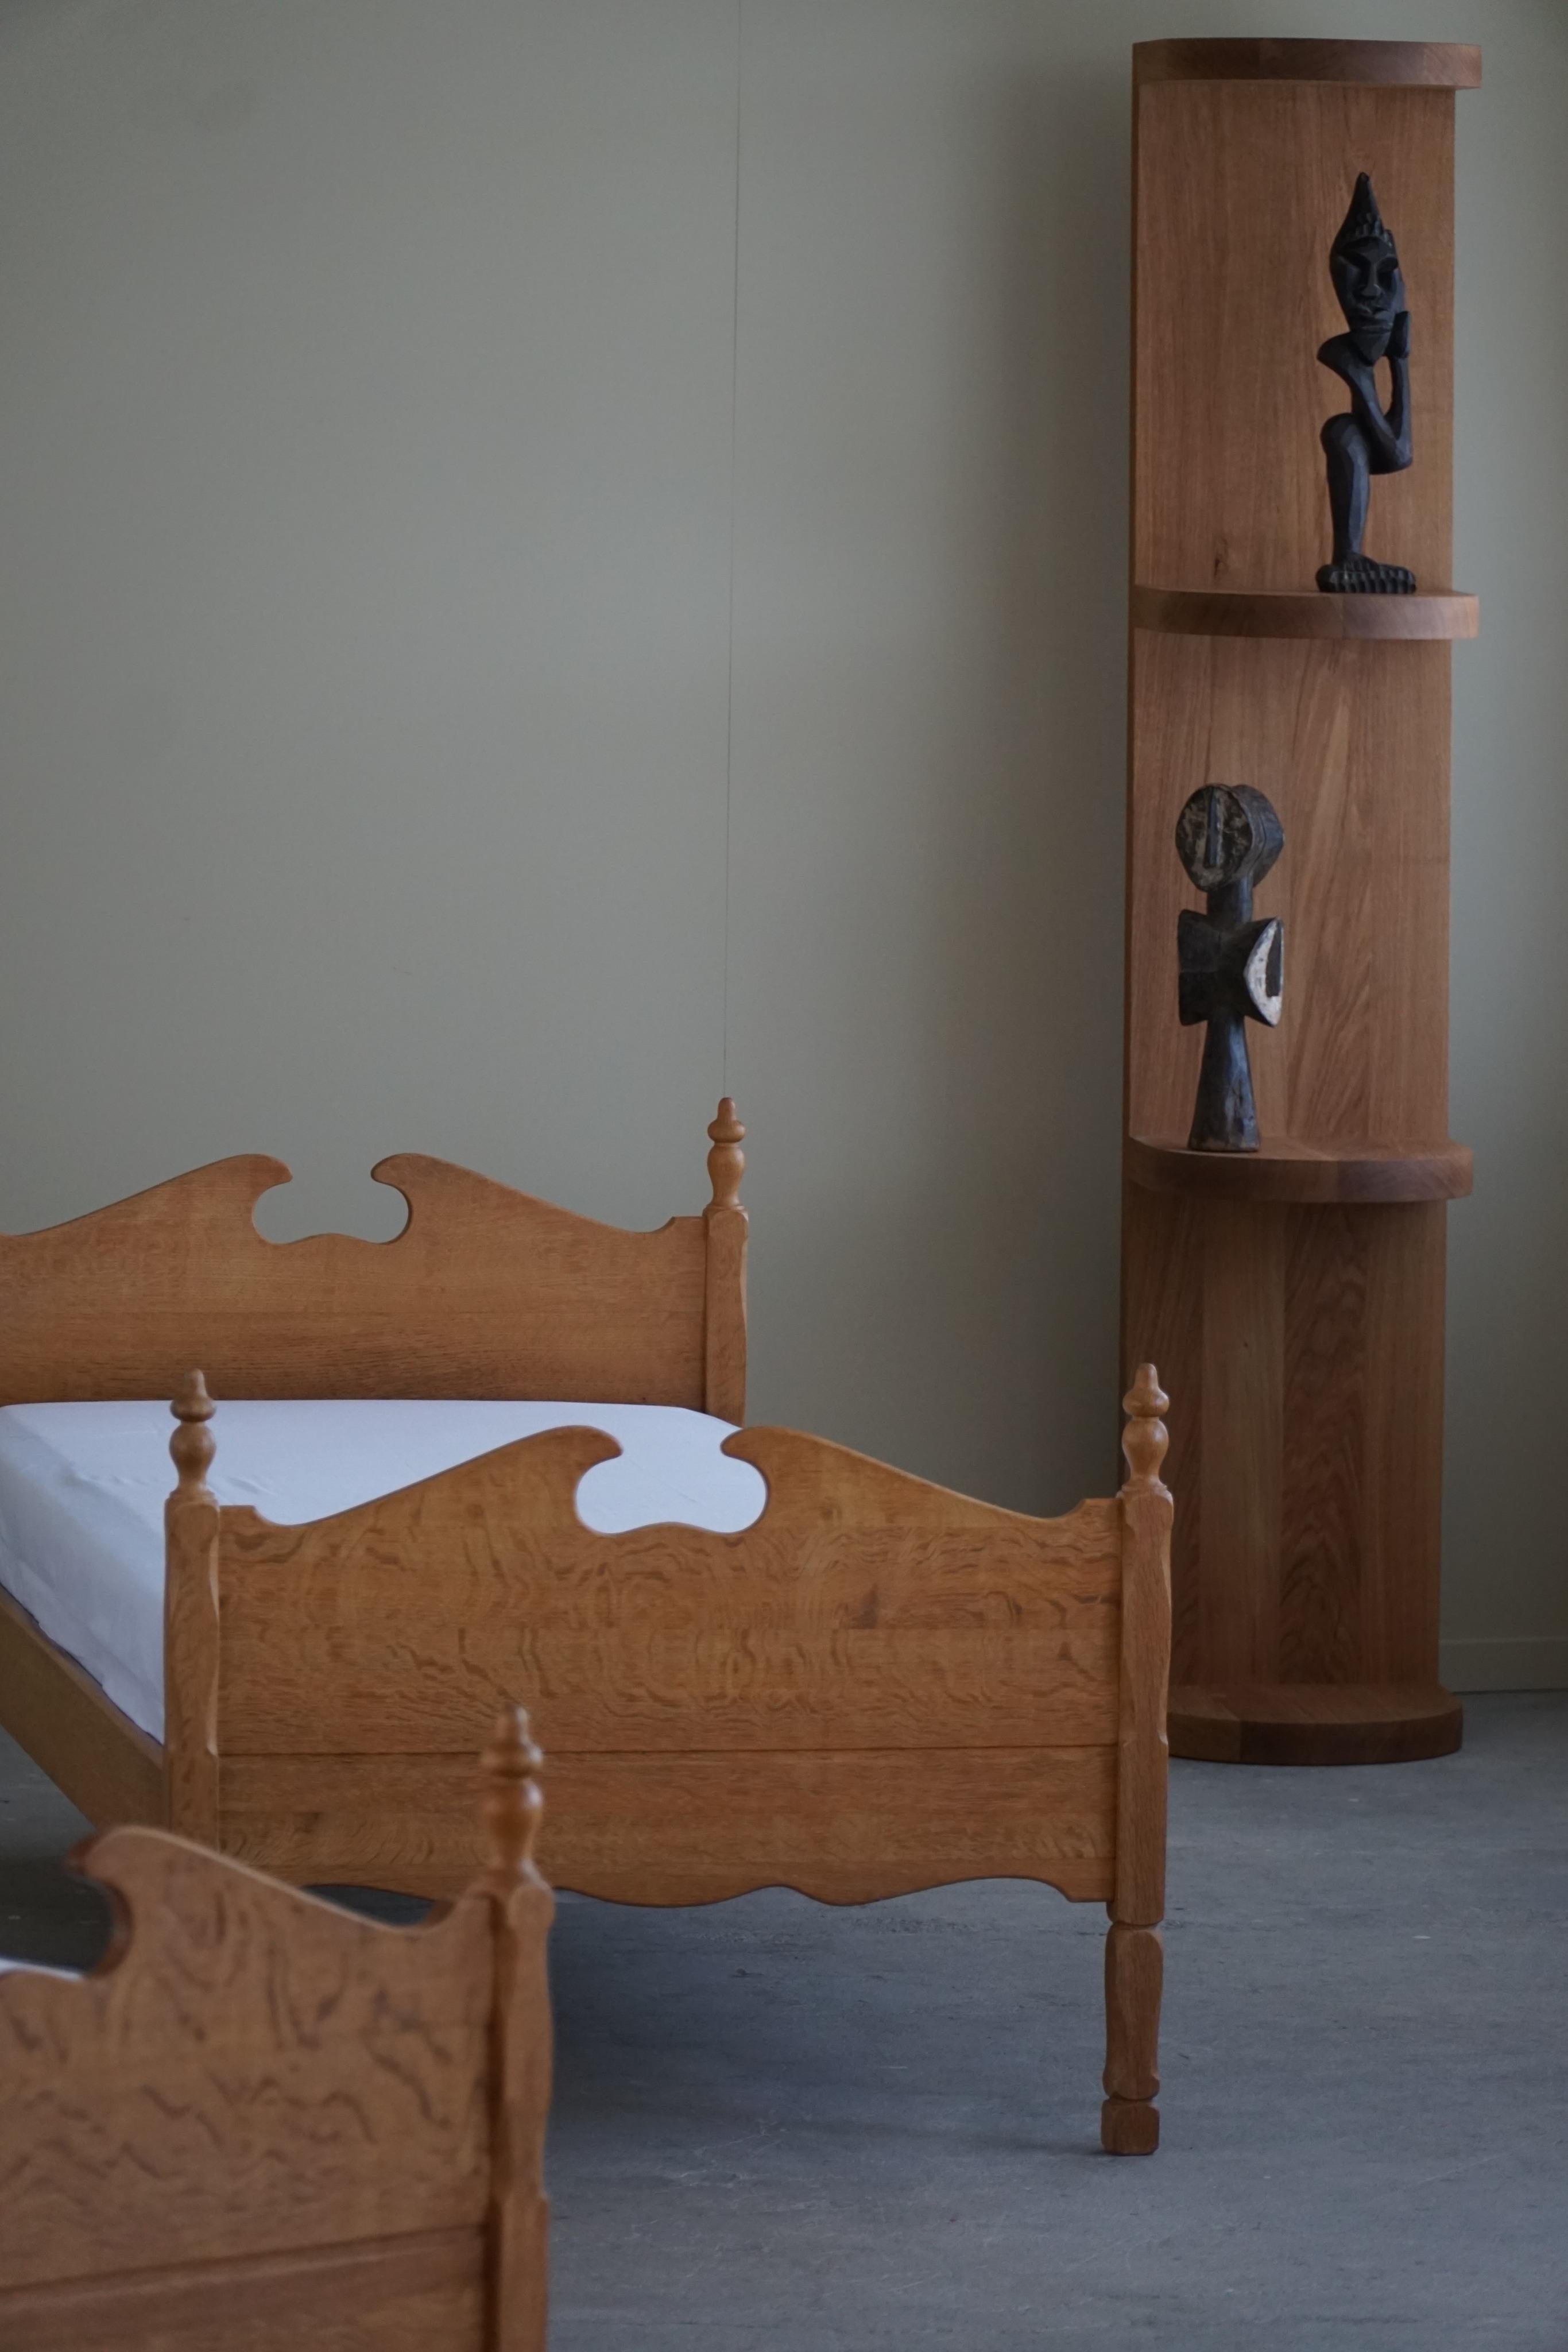 A rare bed in solid oak designed by Thrane & Son. Made in Denmark, 1960s, labeled. 
A sculptural piece that combines Baroque style and modernism. Showing few signs of wear.

Pair available.

This beautiful bed will complement many interior